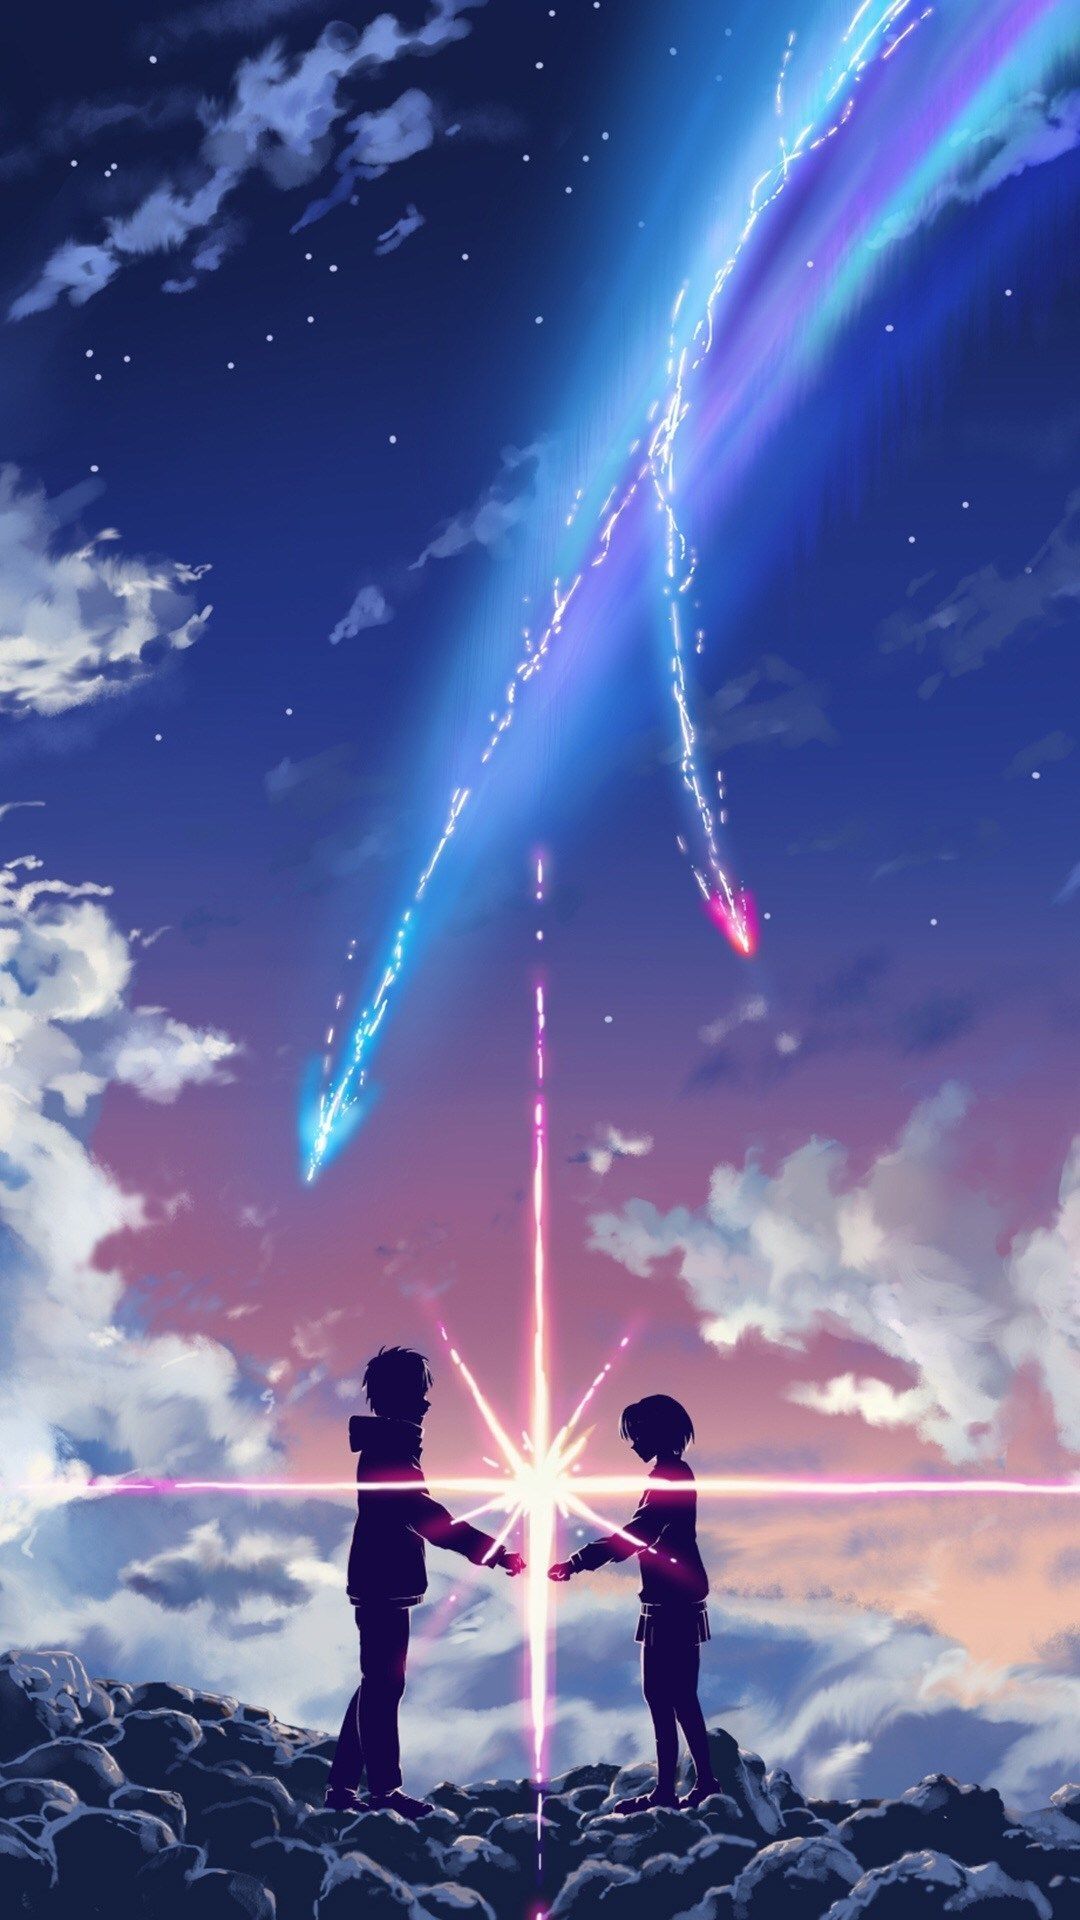 Anime Aesthetic iPhone Wallpaper Fresh Your Name